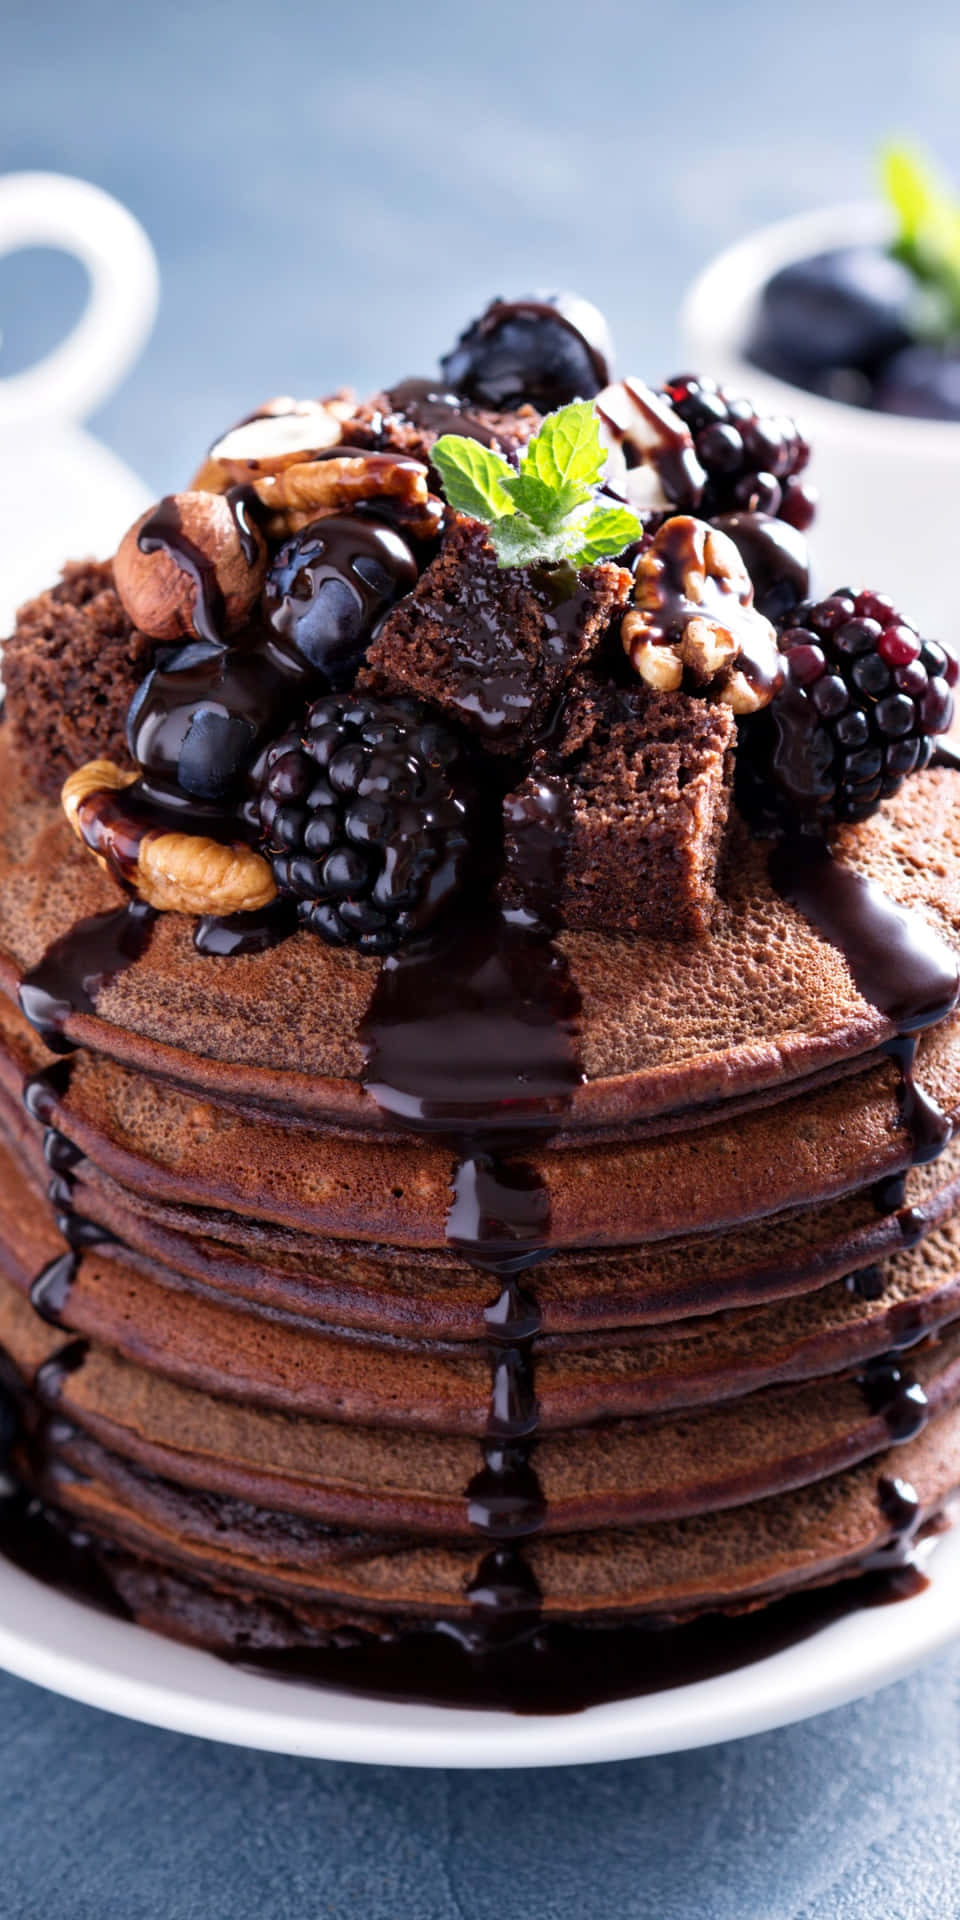 A Stack Of Chocolate Pancakes With Nuts And Syrup